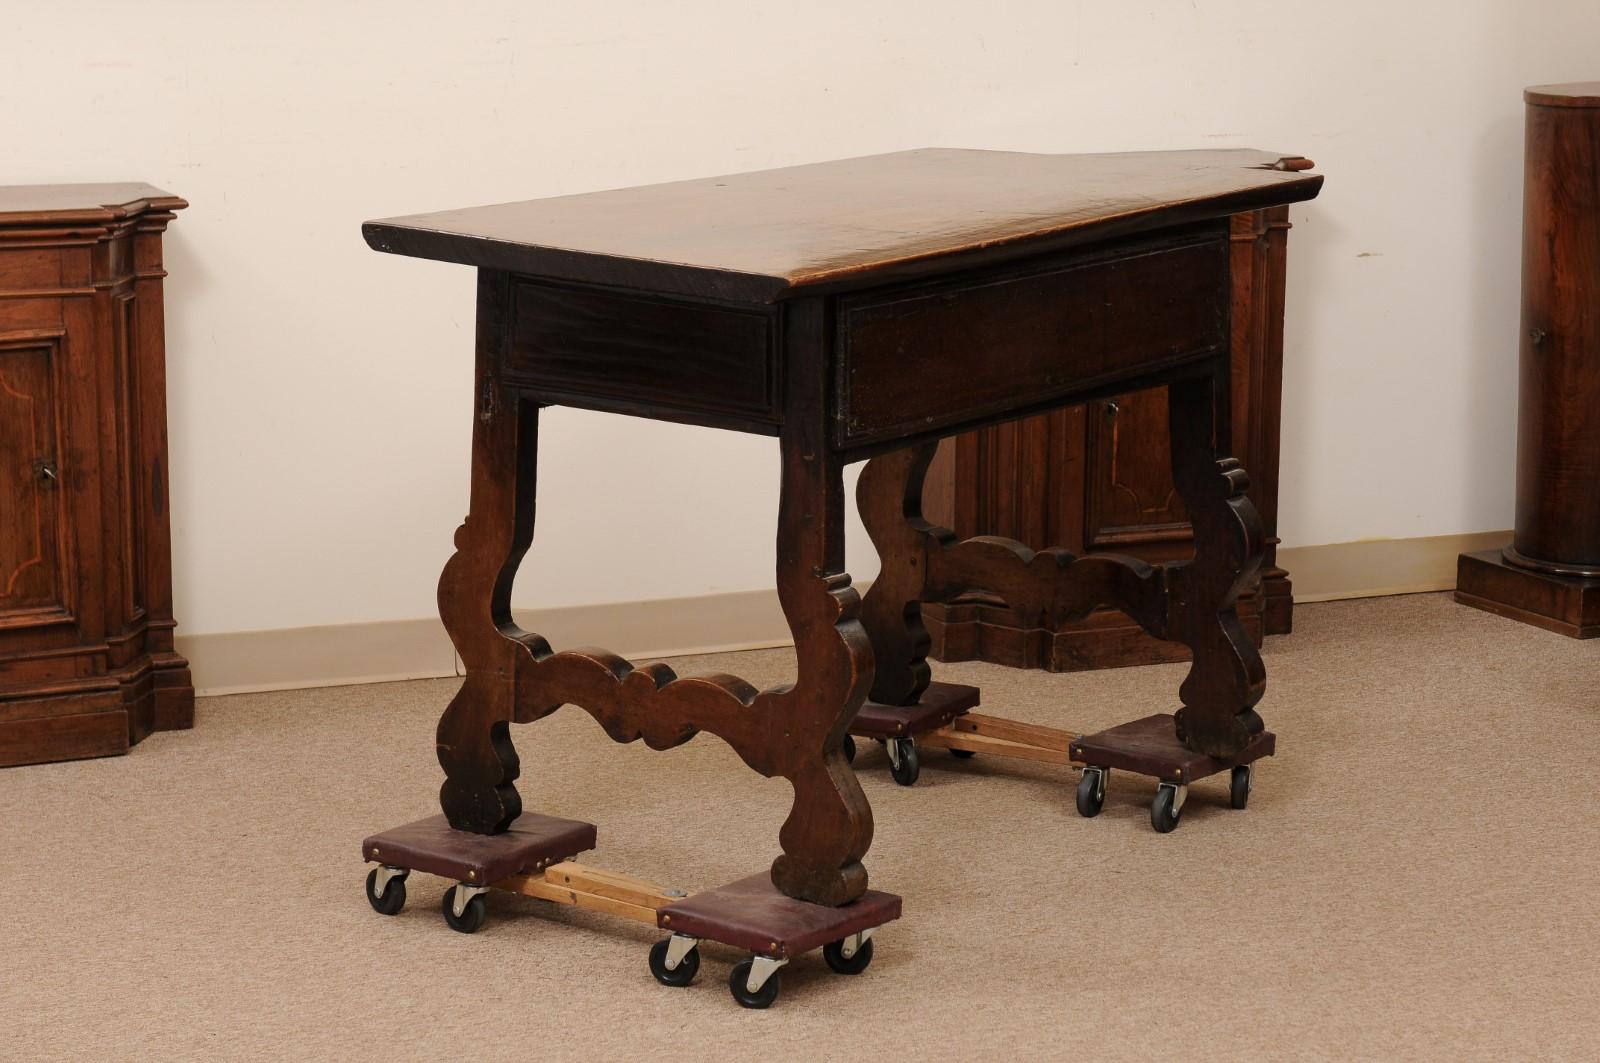 Spanish Walnut Console Table with 2 Drawers and Lyre Legs, Early 18th Century For Sale 8